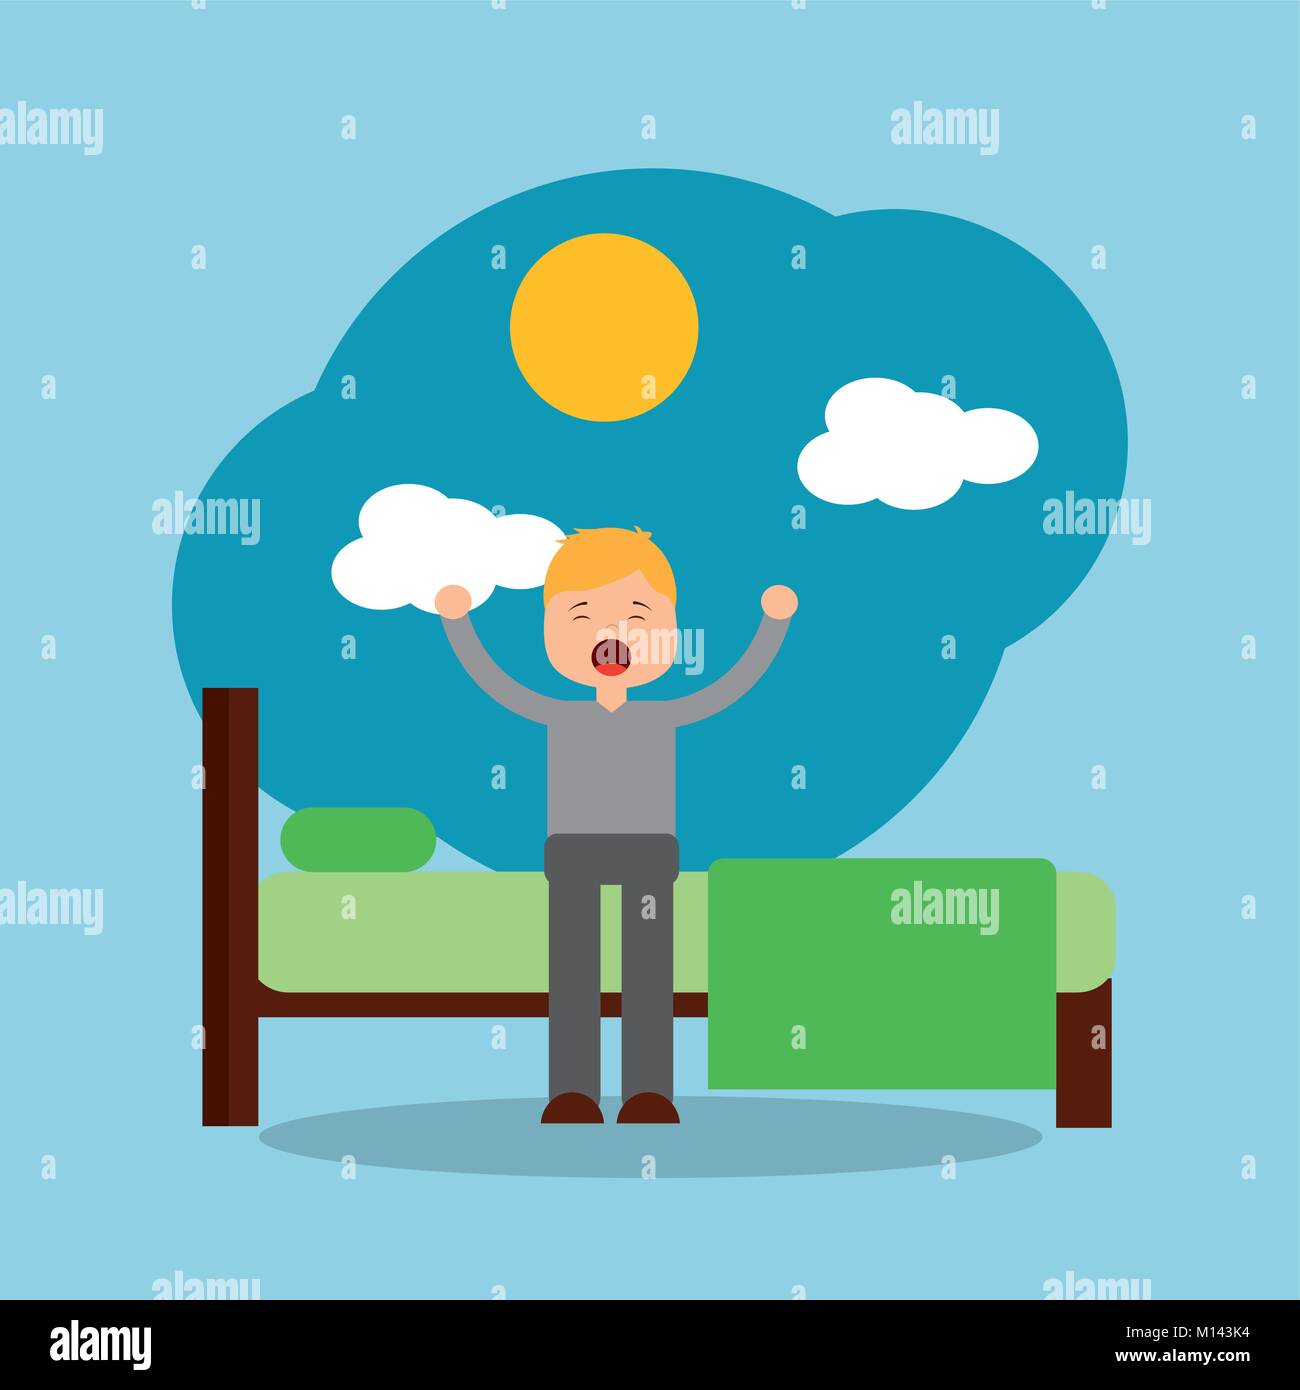 man waking up in the morning stretching sitting on his bed sunshine vector illustration Stock Vector